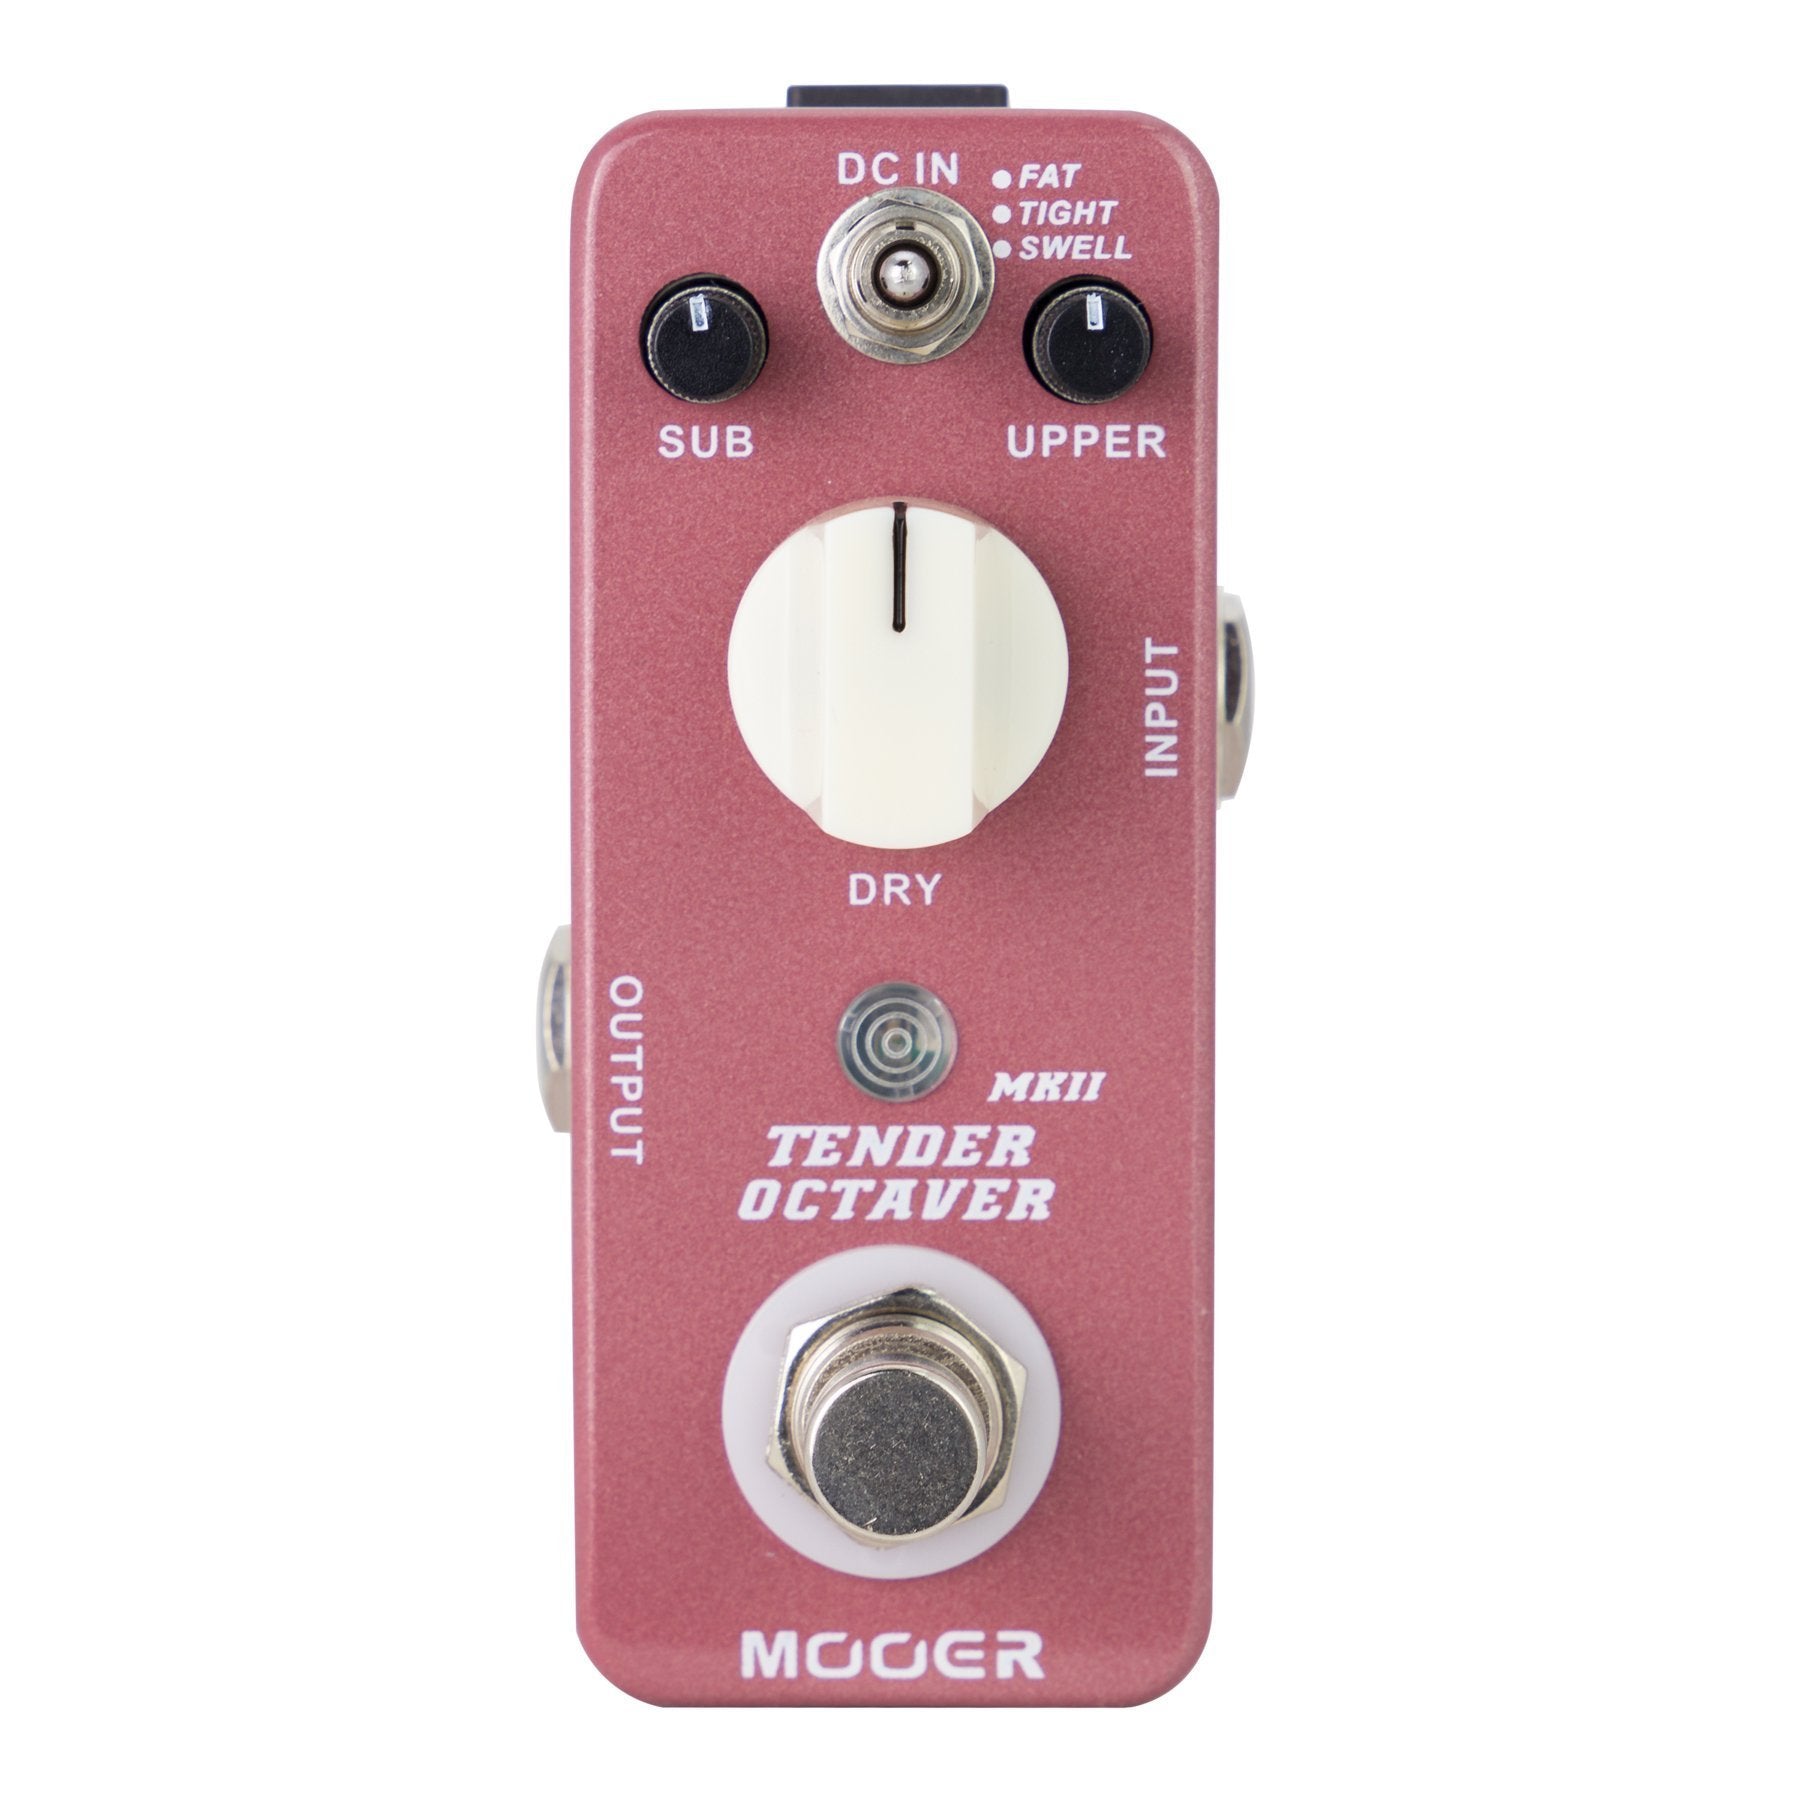 Mooer Tender Octaver MKII Precise Octave Micro Guitar Effects Pedal-MEP-TO